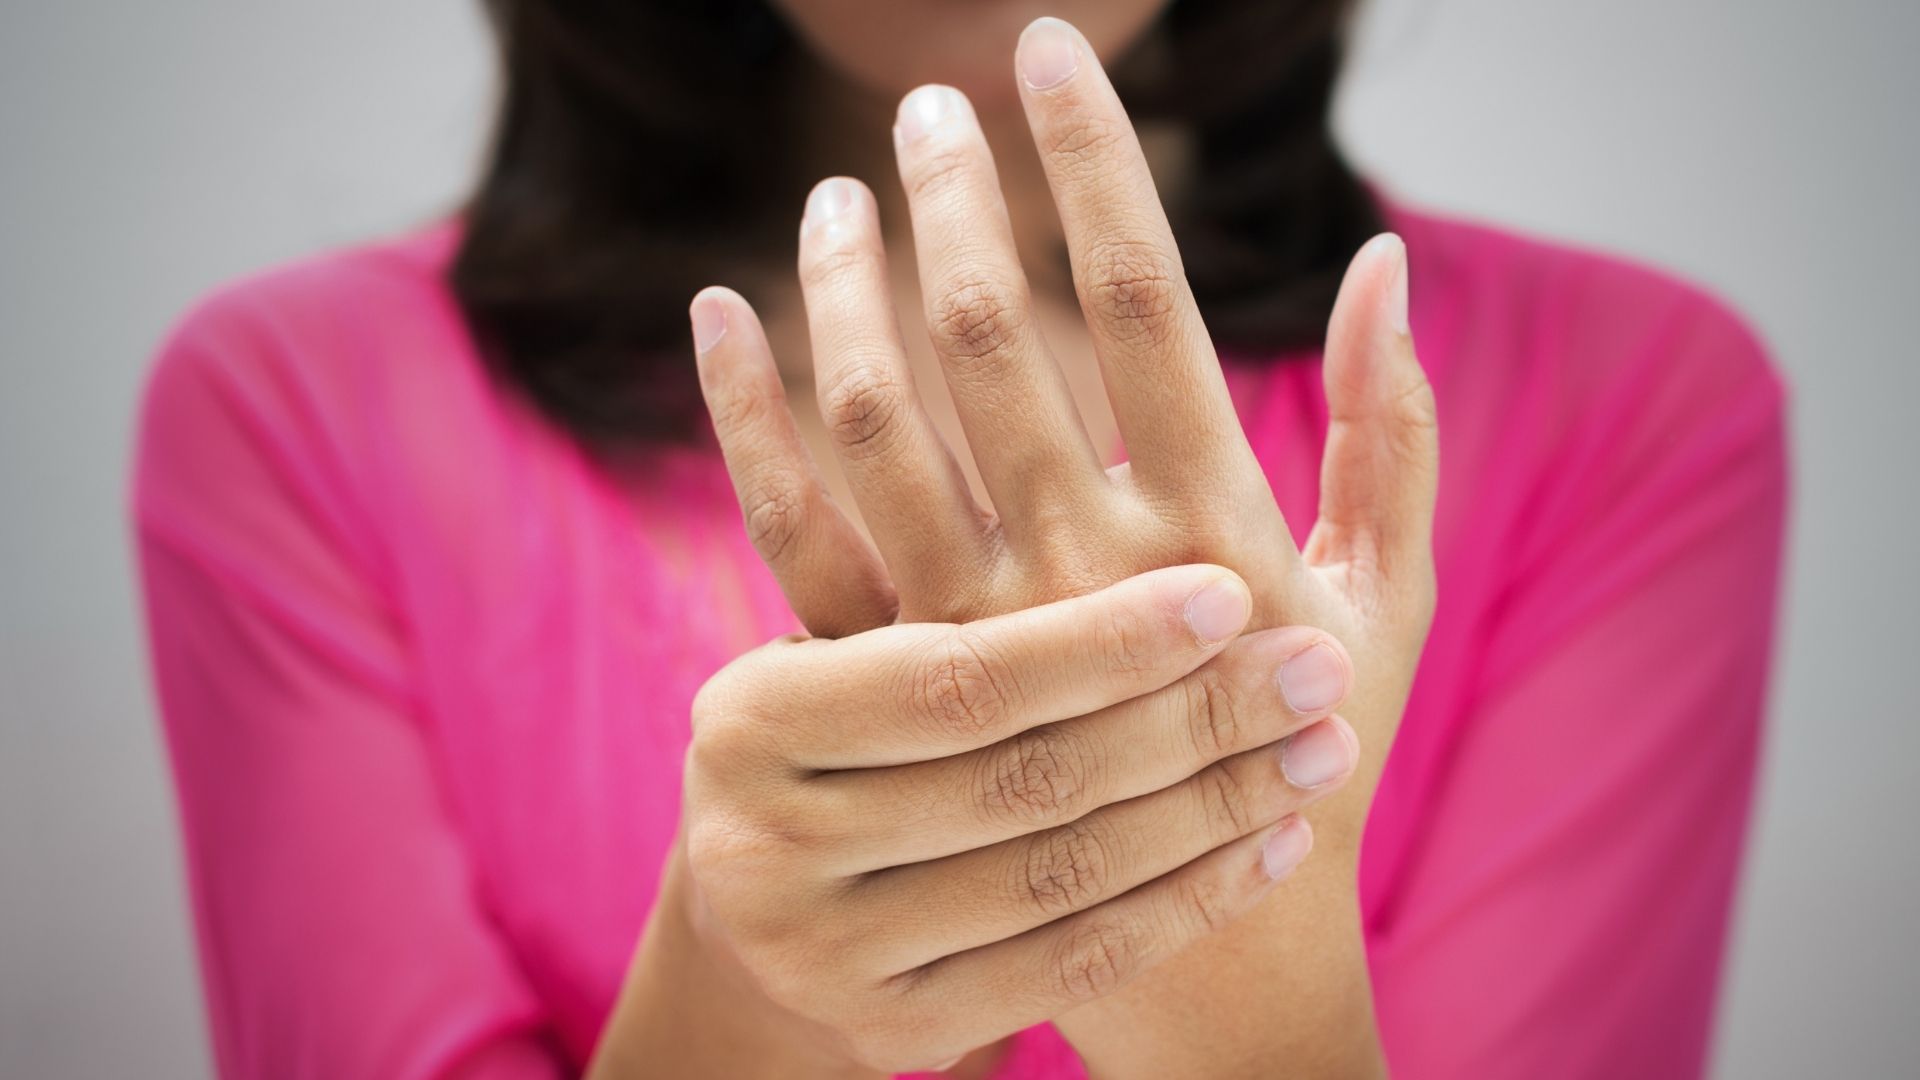 Suffering From Wrist Pain? It Could Be Carpal Tunnel Syndrome